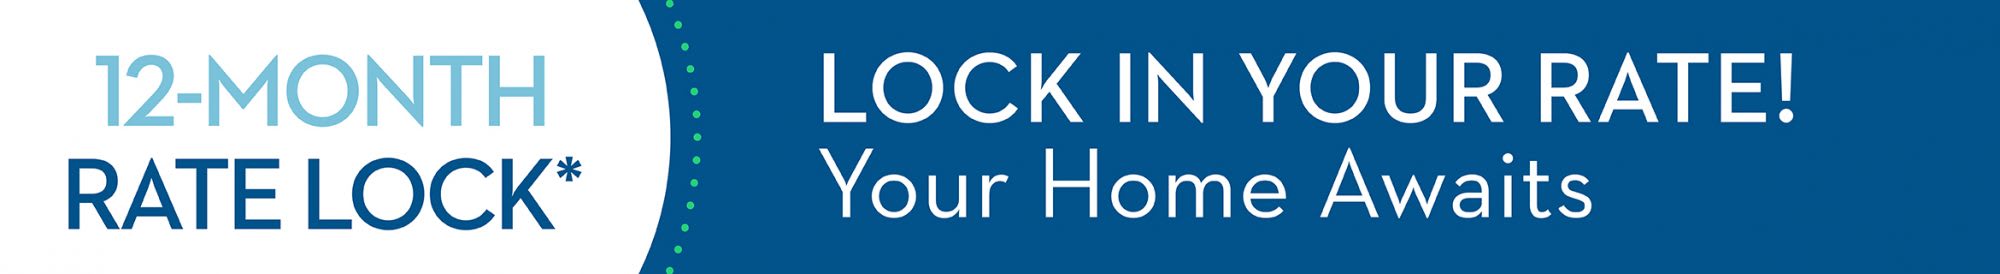 12-Month Rate Lock - Lock in your rate! Your home awaits.